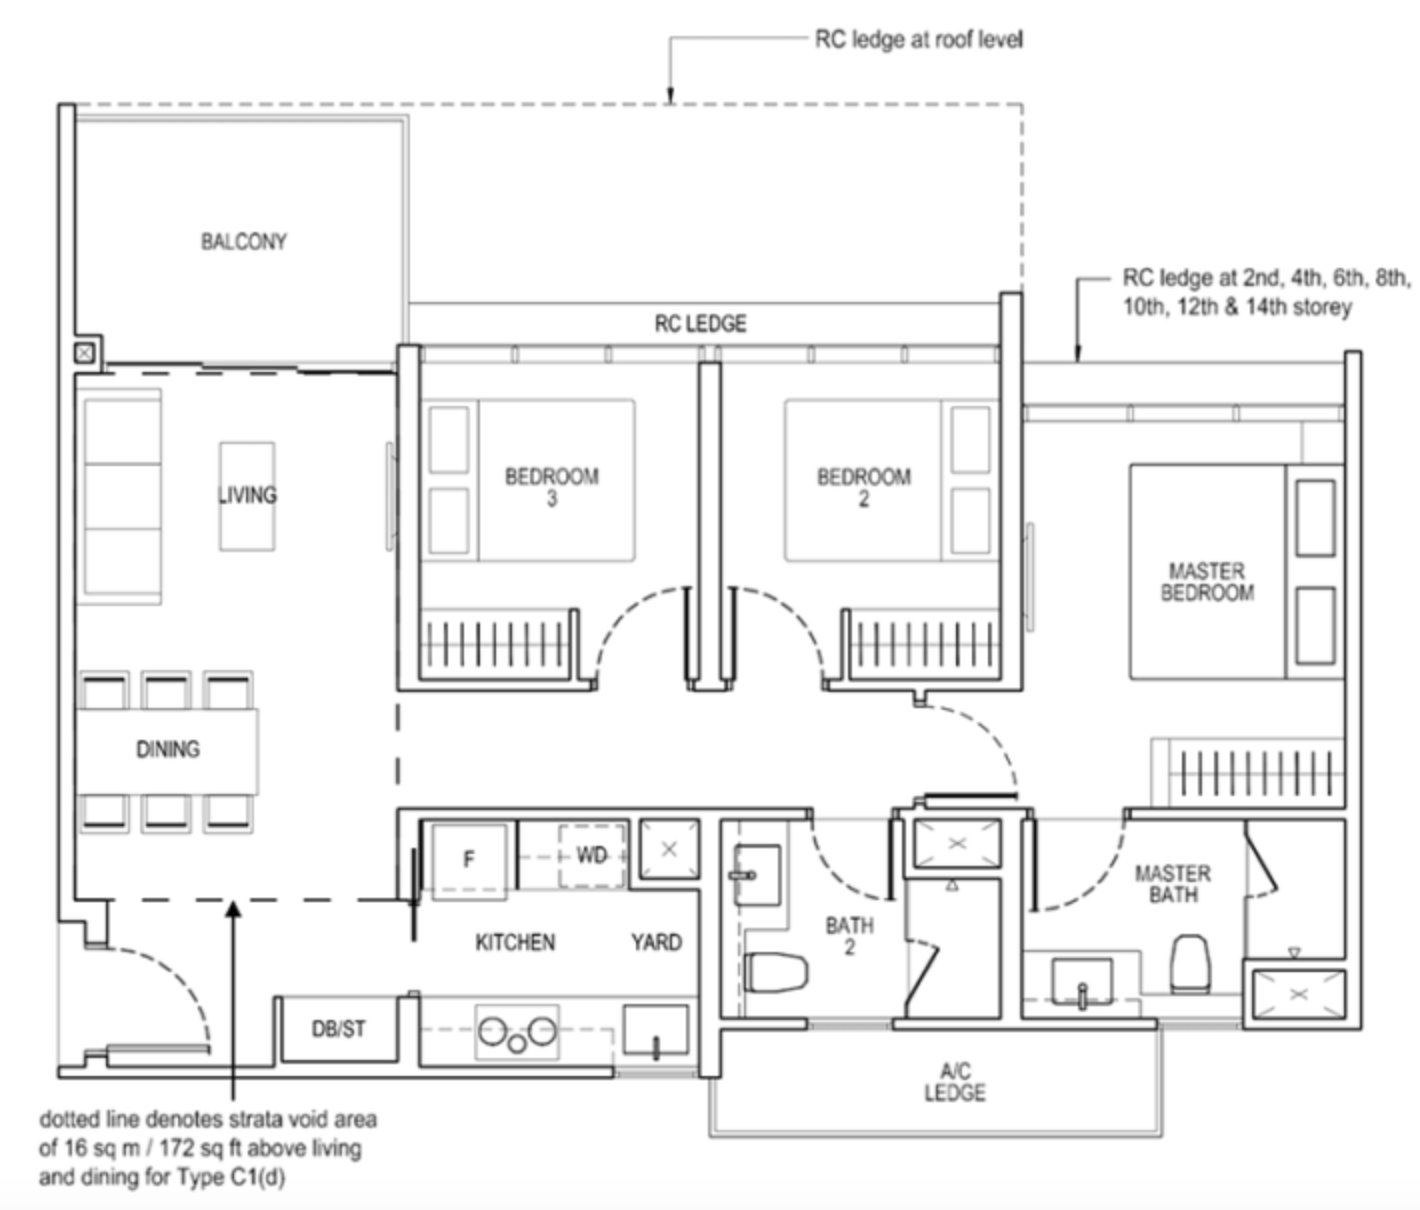 The Tapestry C1(d) 3 Bedroom Deluxe Layout